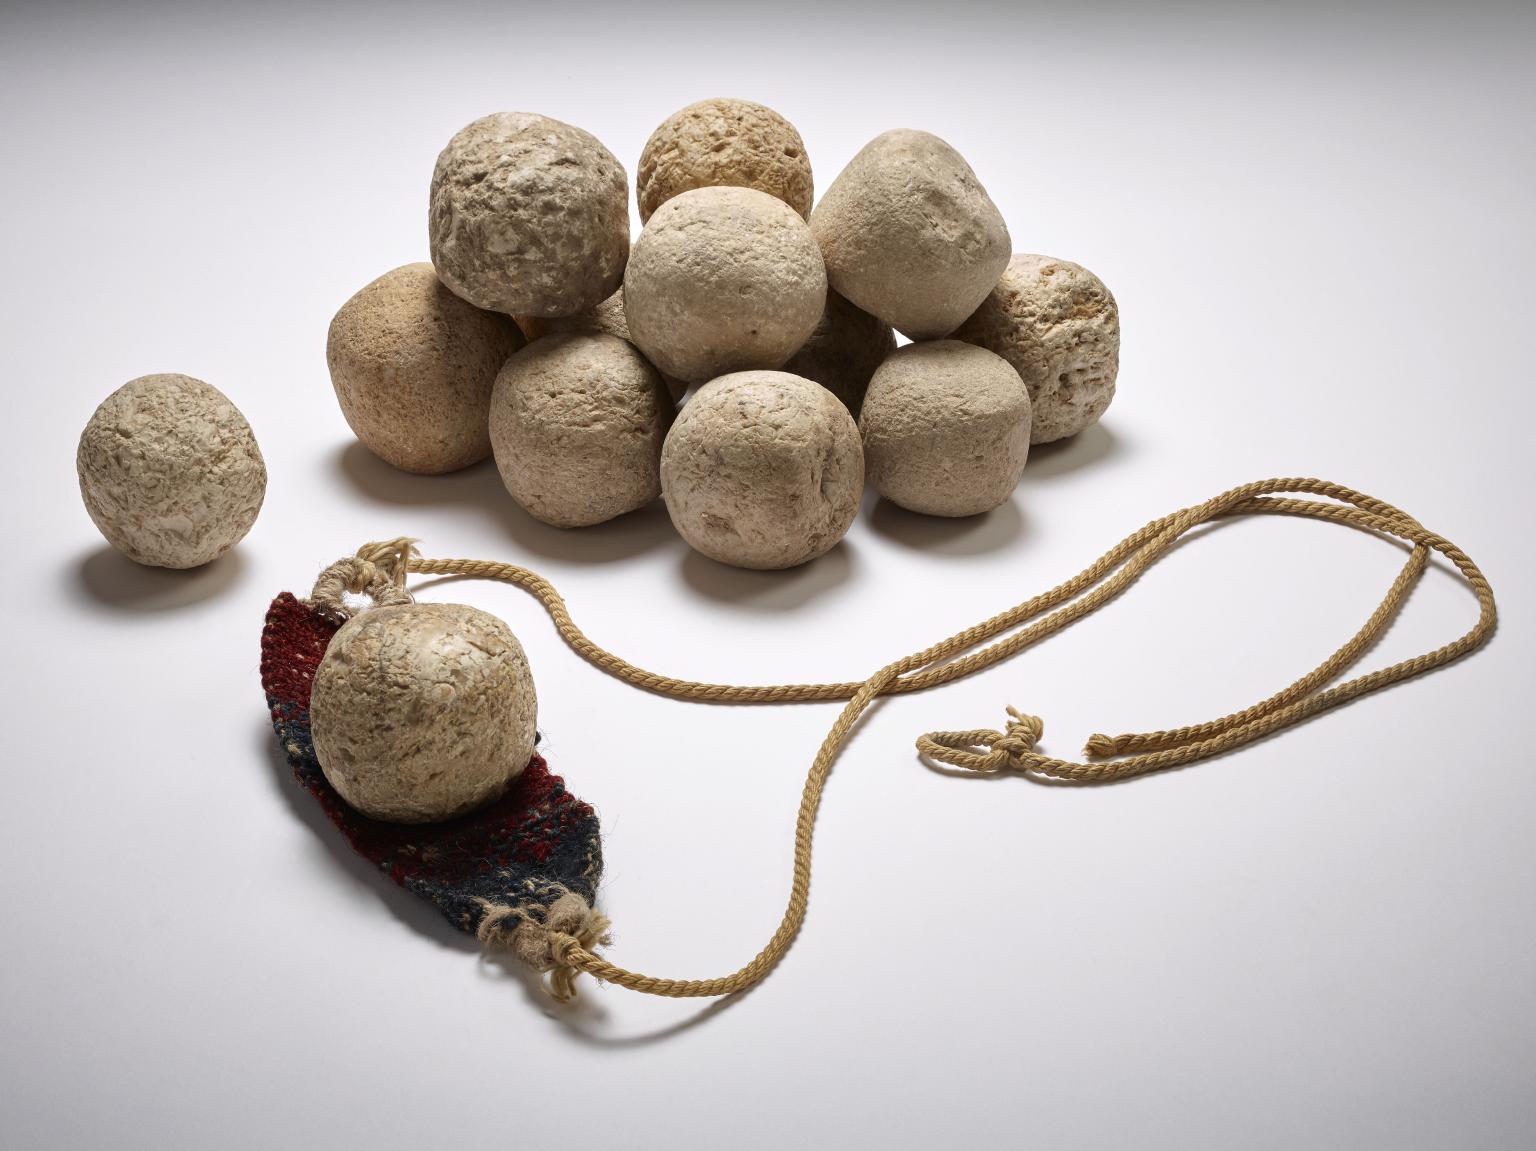 Pile of stones next to leather band attached to a cord